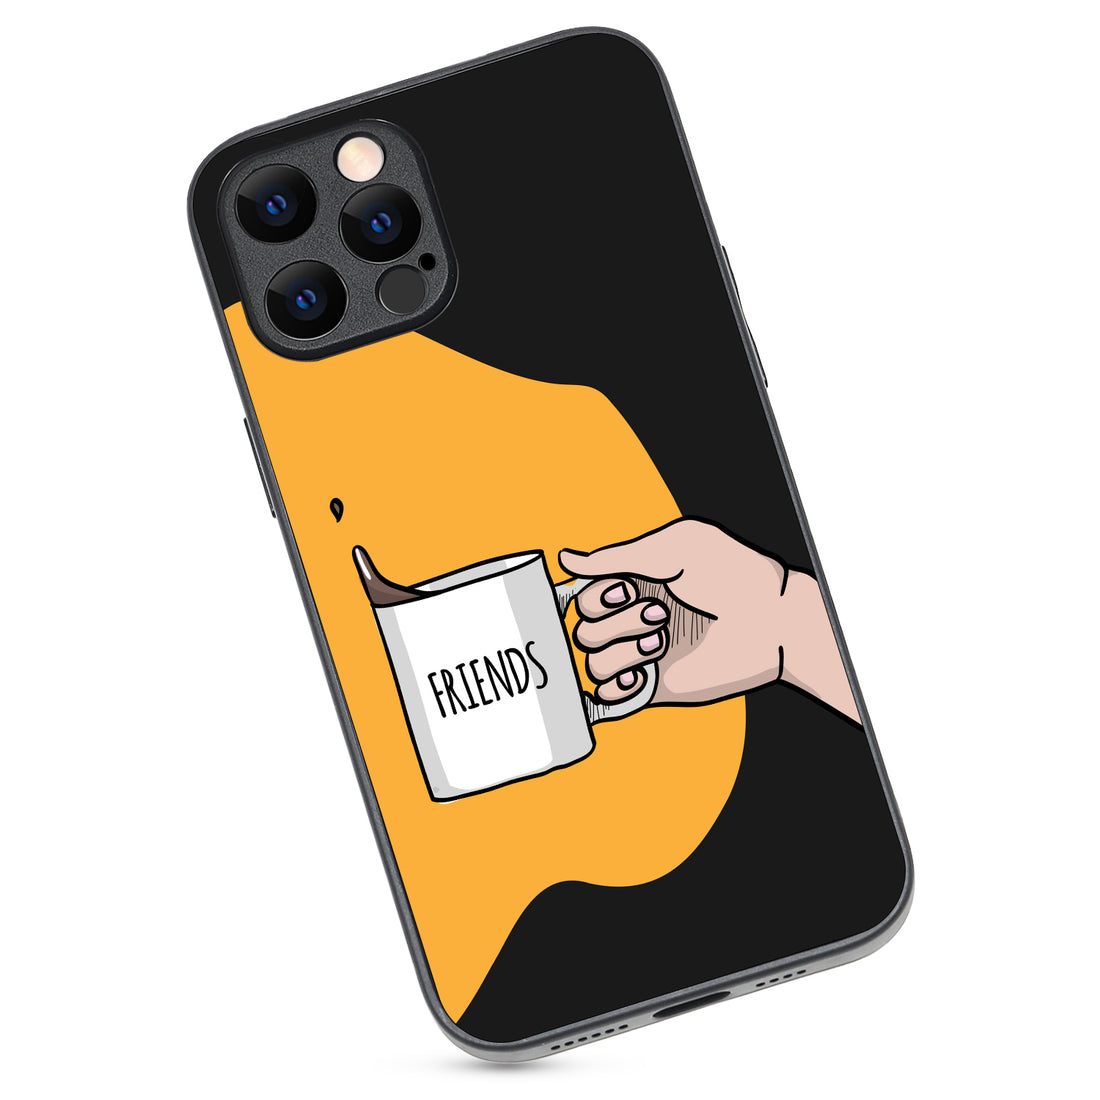 Friend Cheers Bff iPhone 12 Pro Max Case